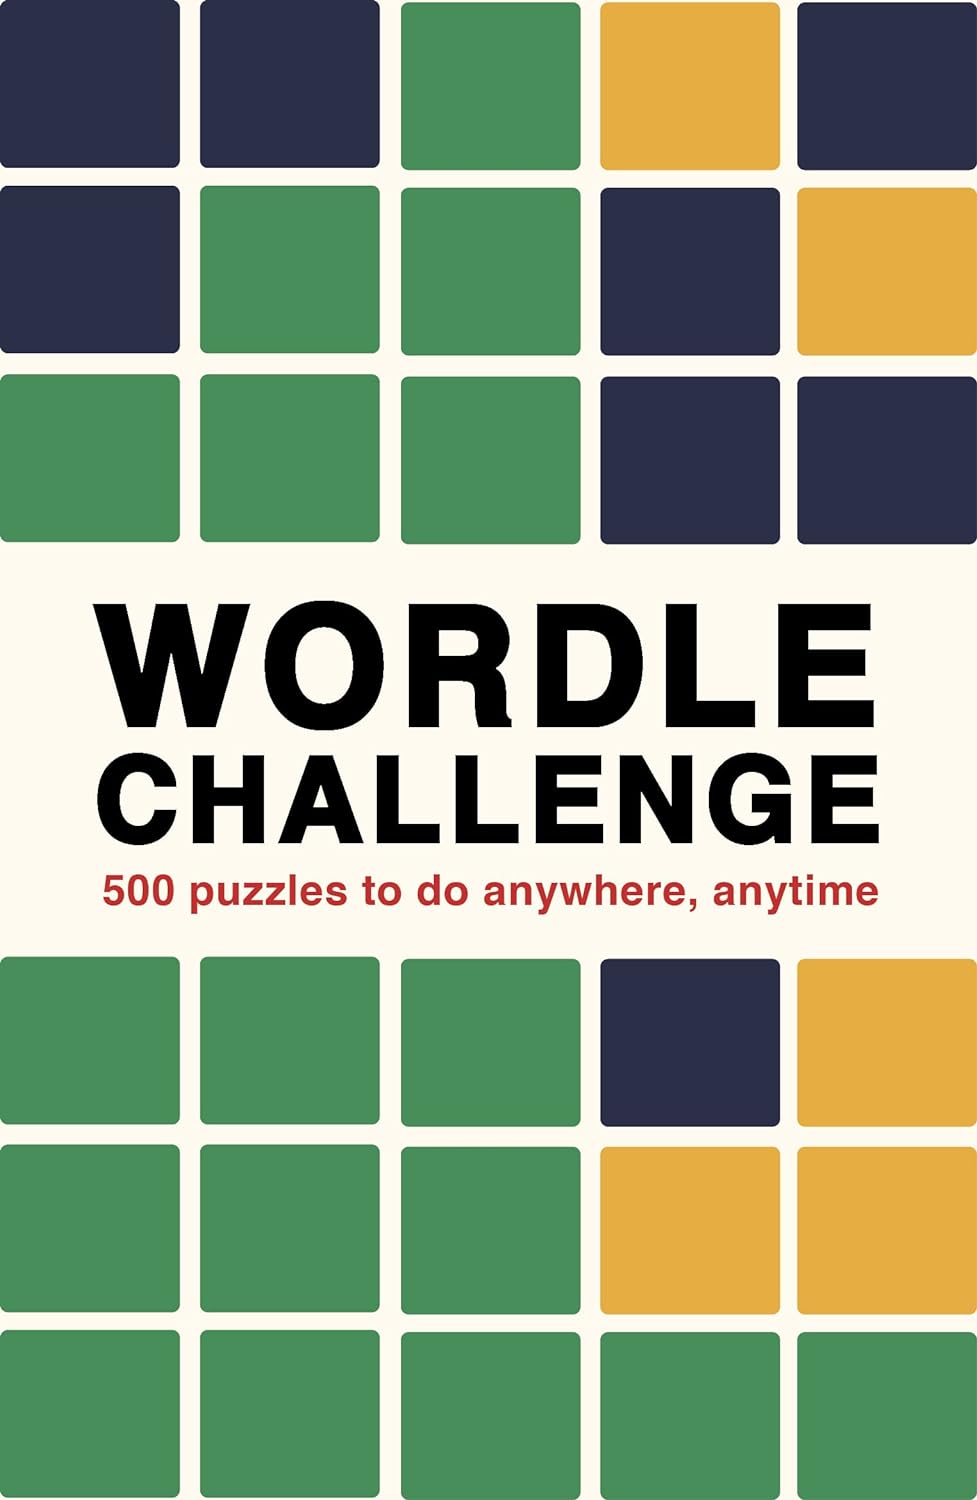 Wordle Challenge 500 Puzzles To Do Anywhere, Anytime